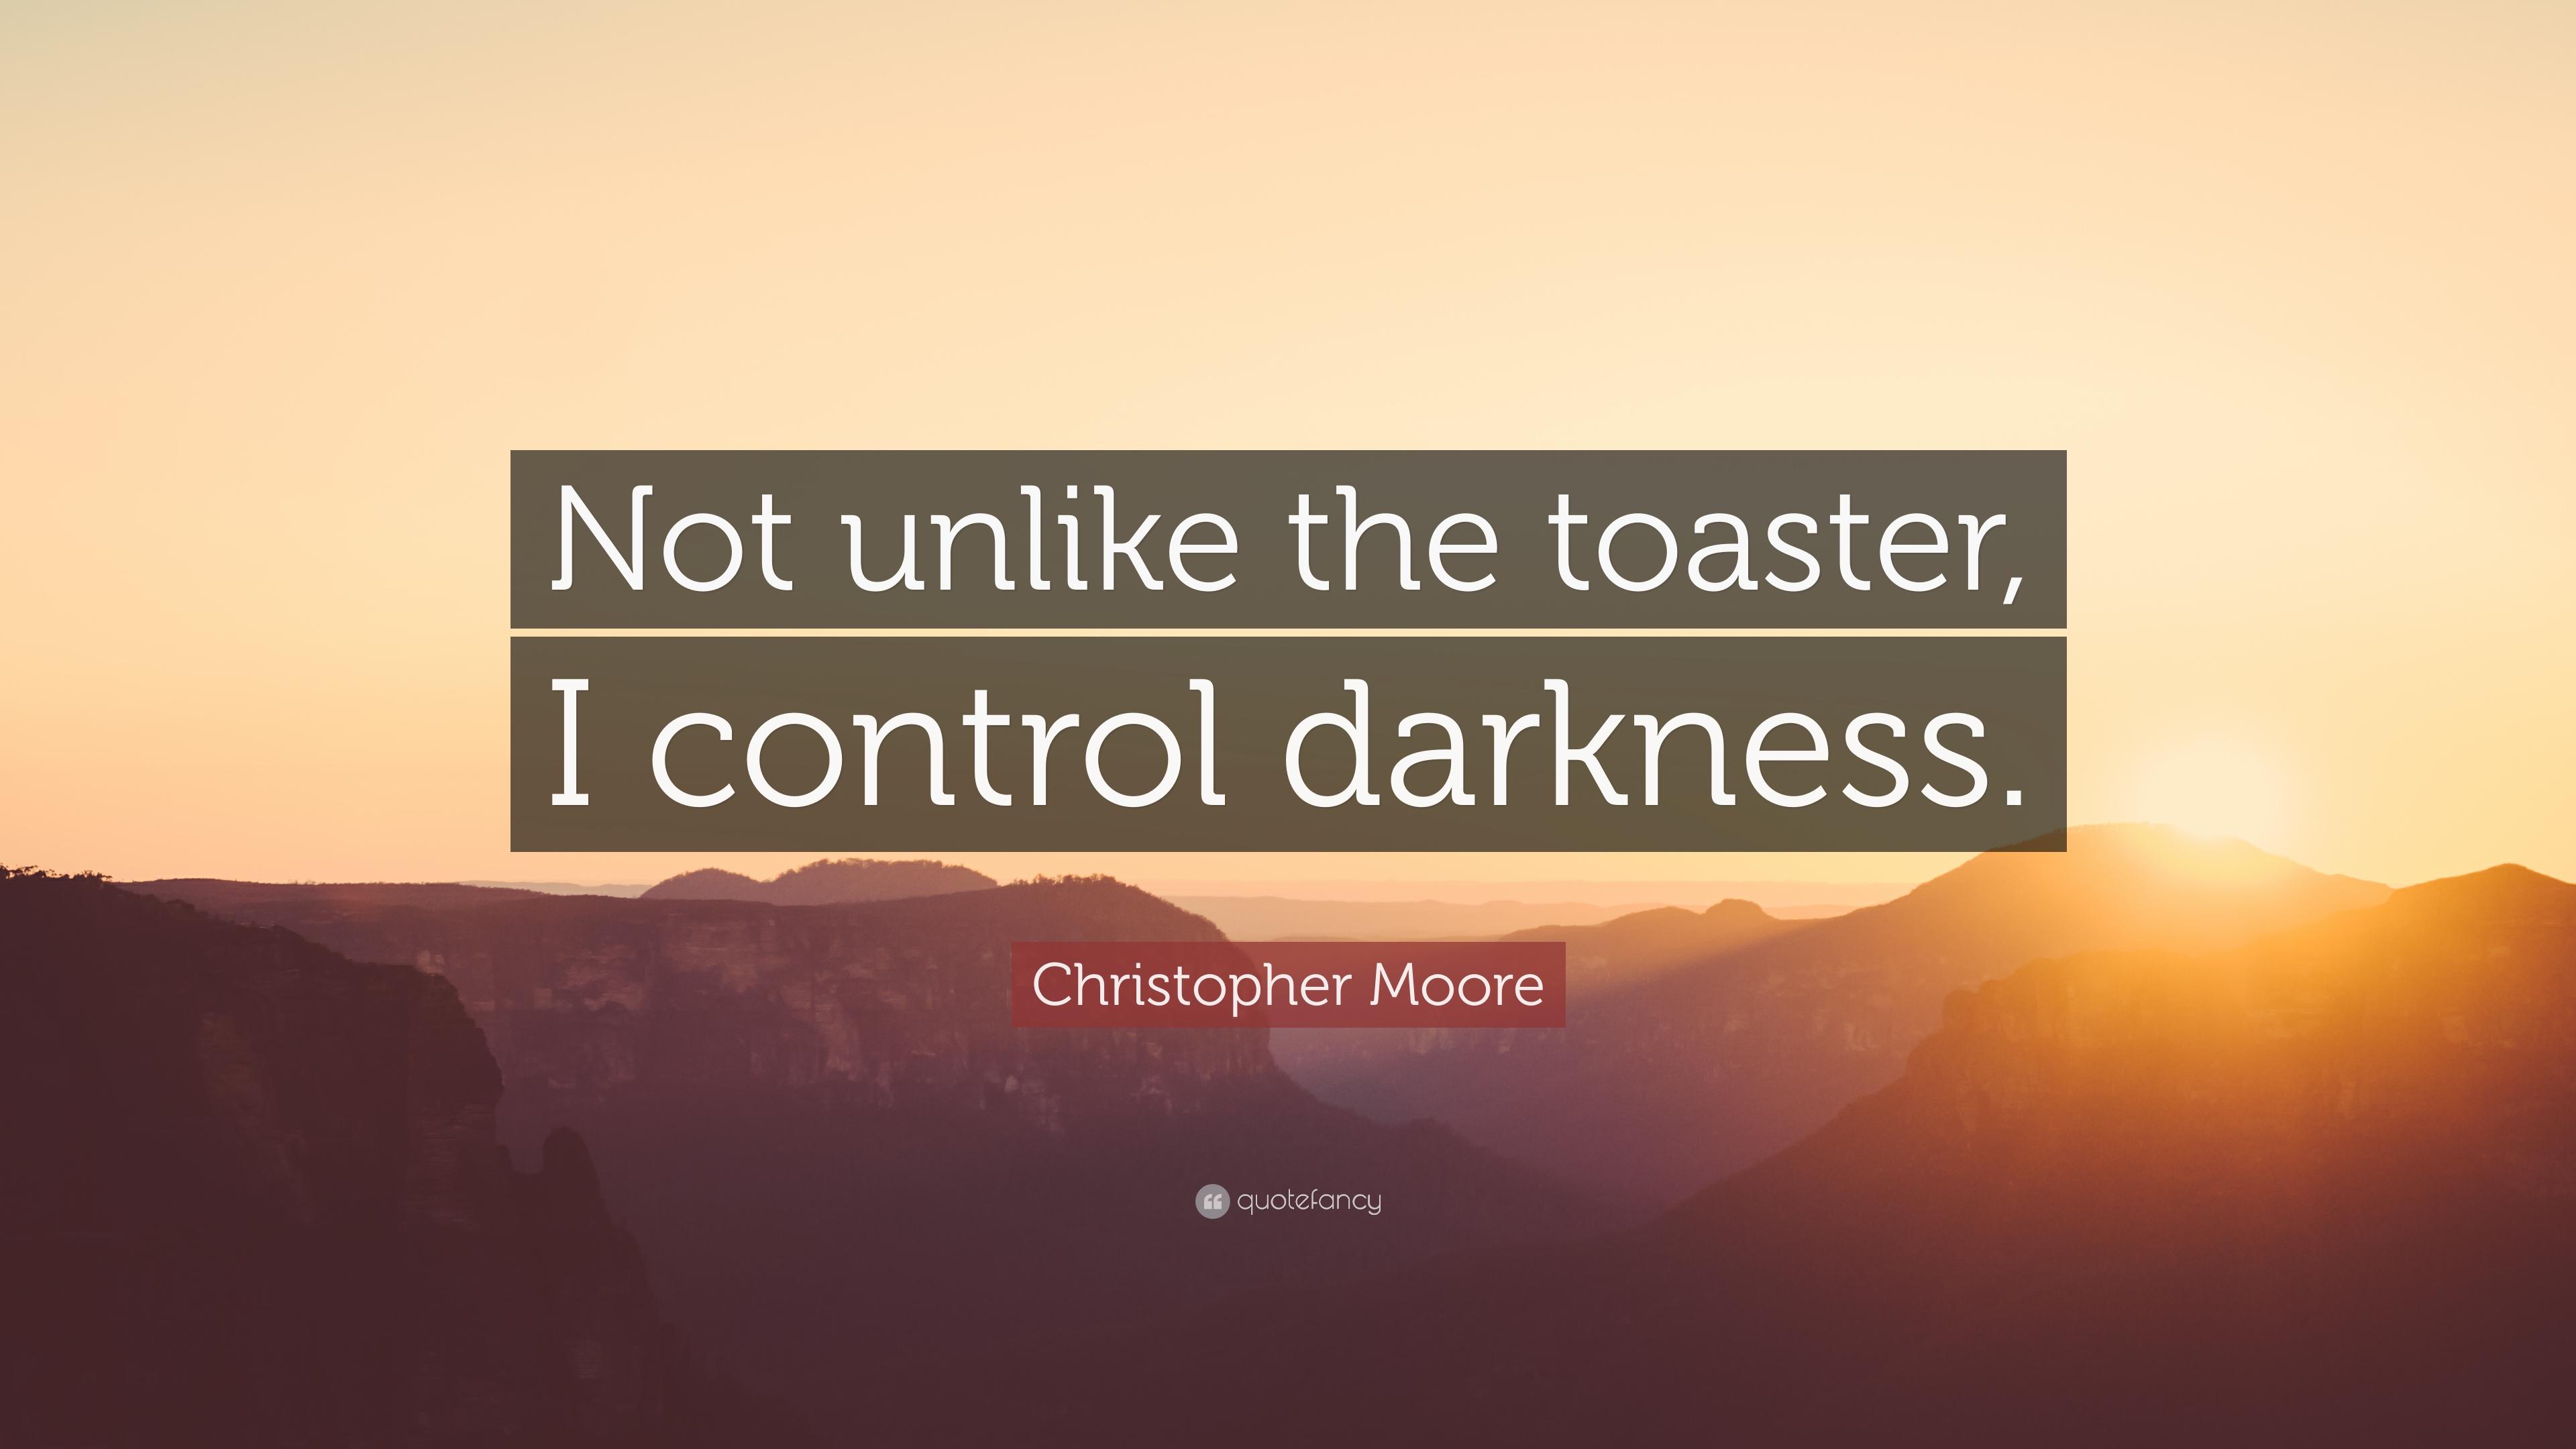 Christopher Moore Quote: “Not unlike the toaster, I control